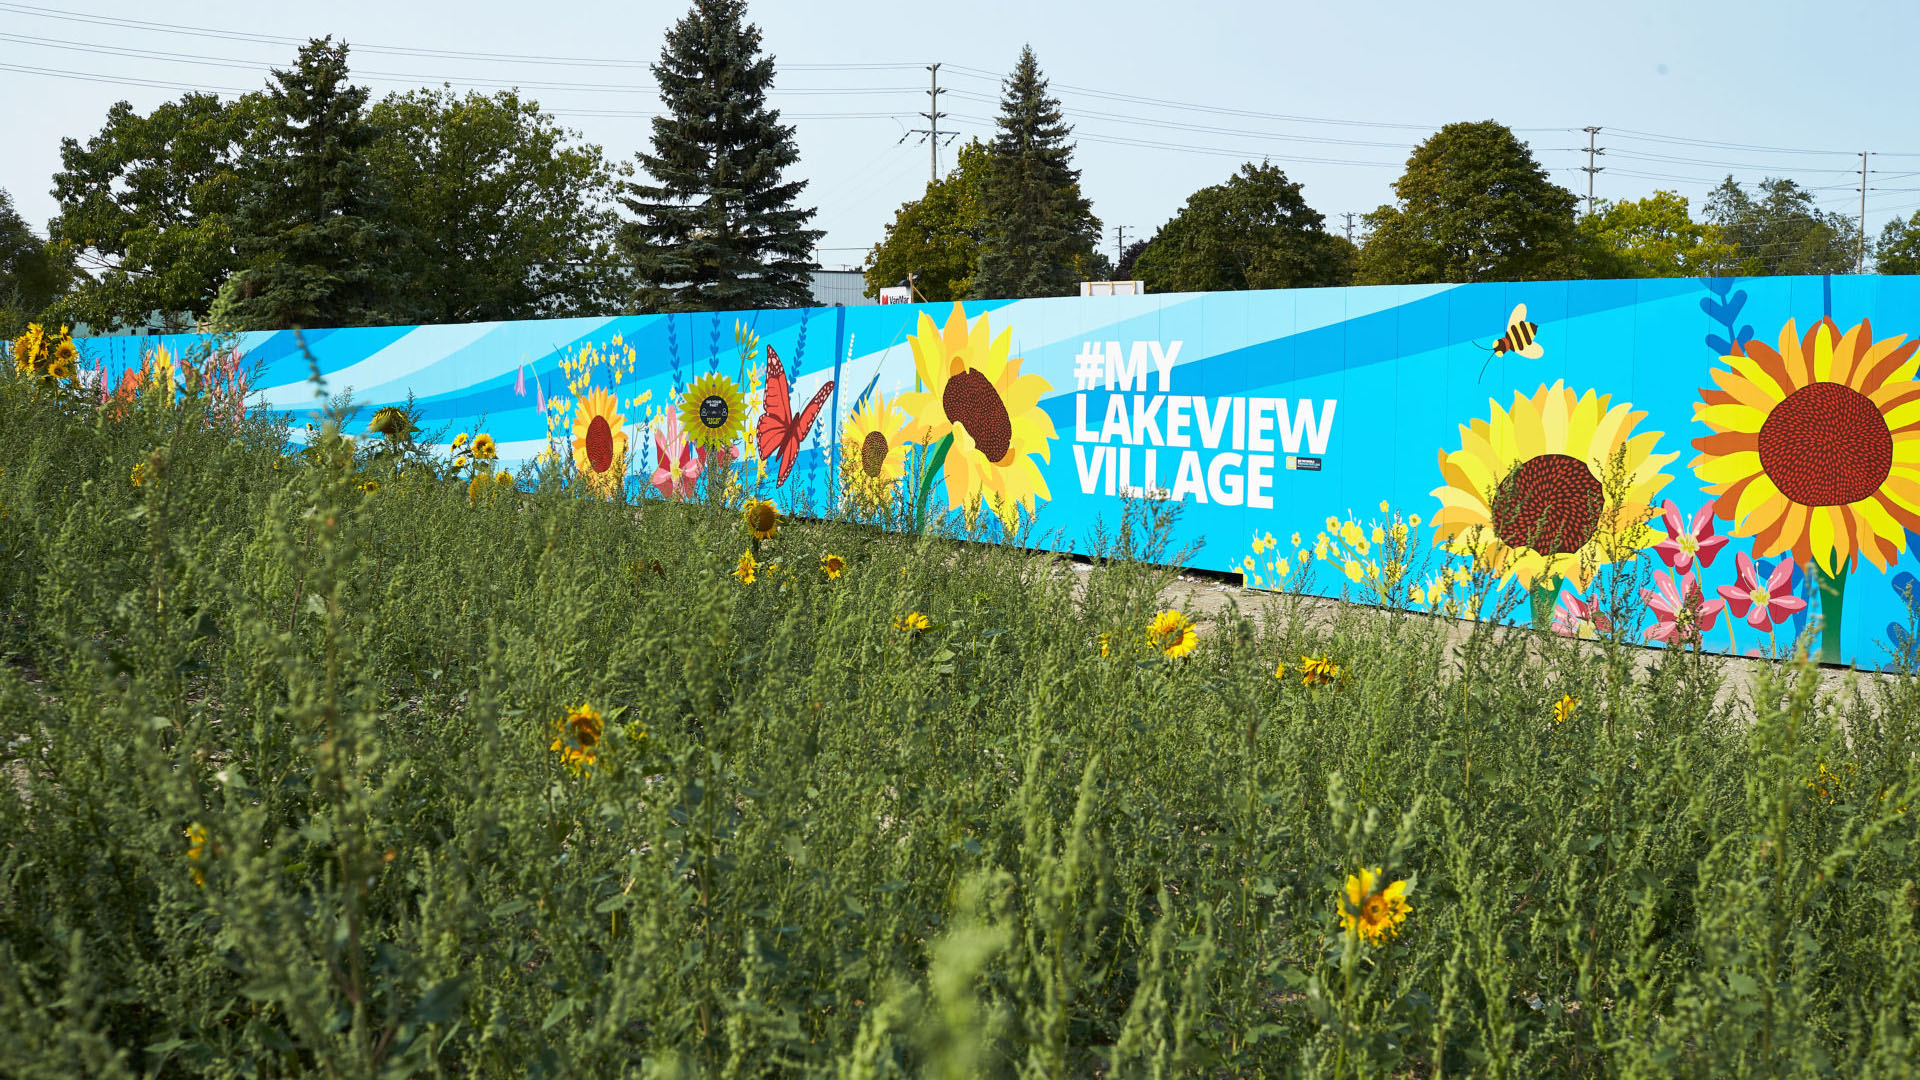 hoarding lakeview village